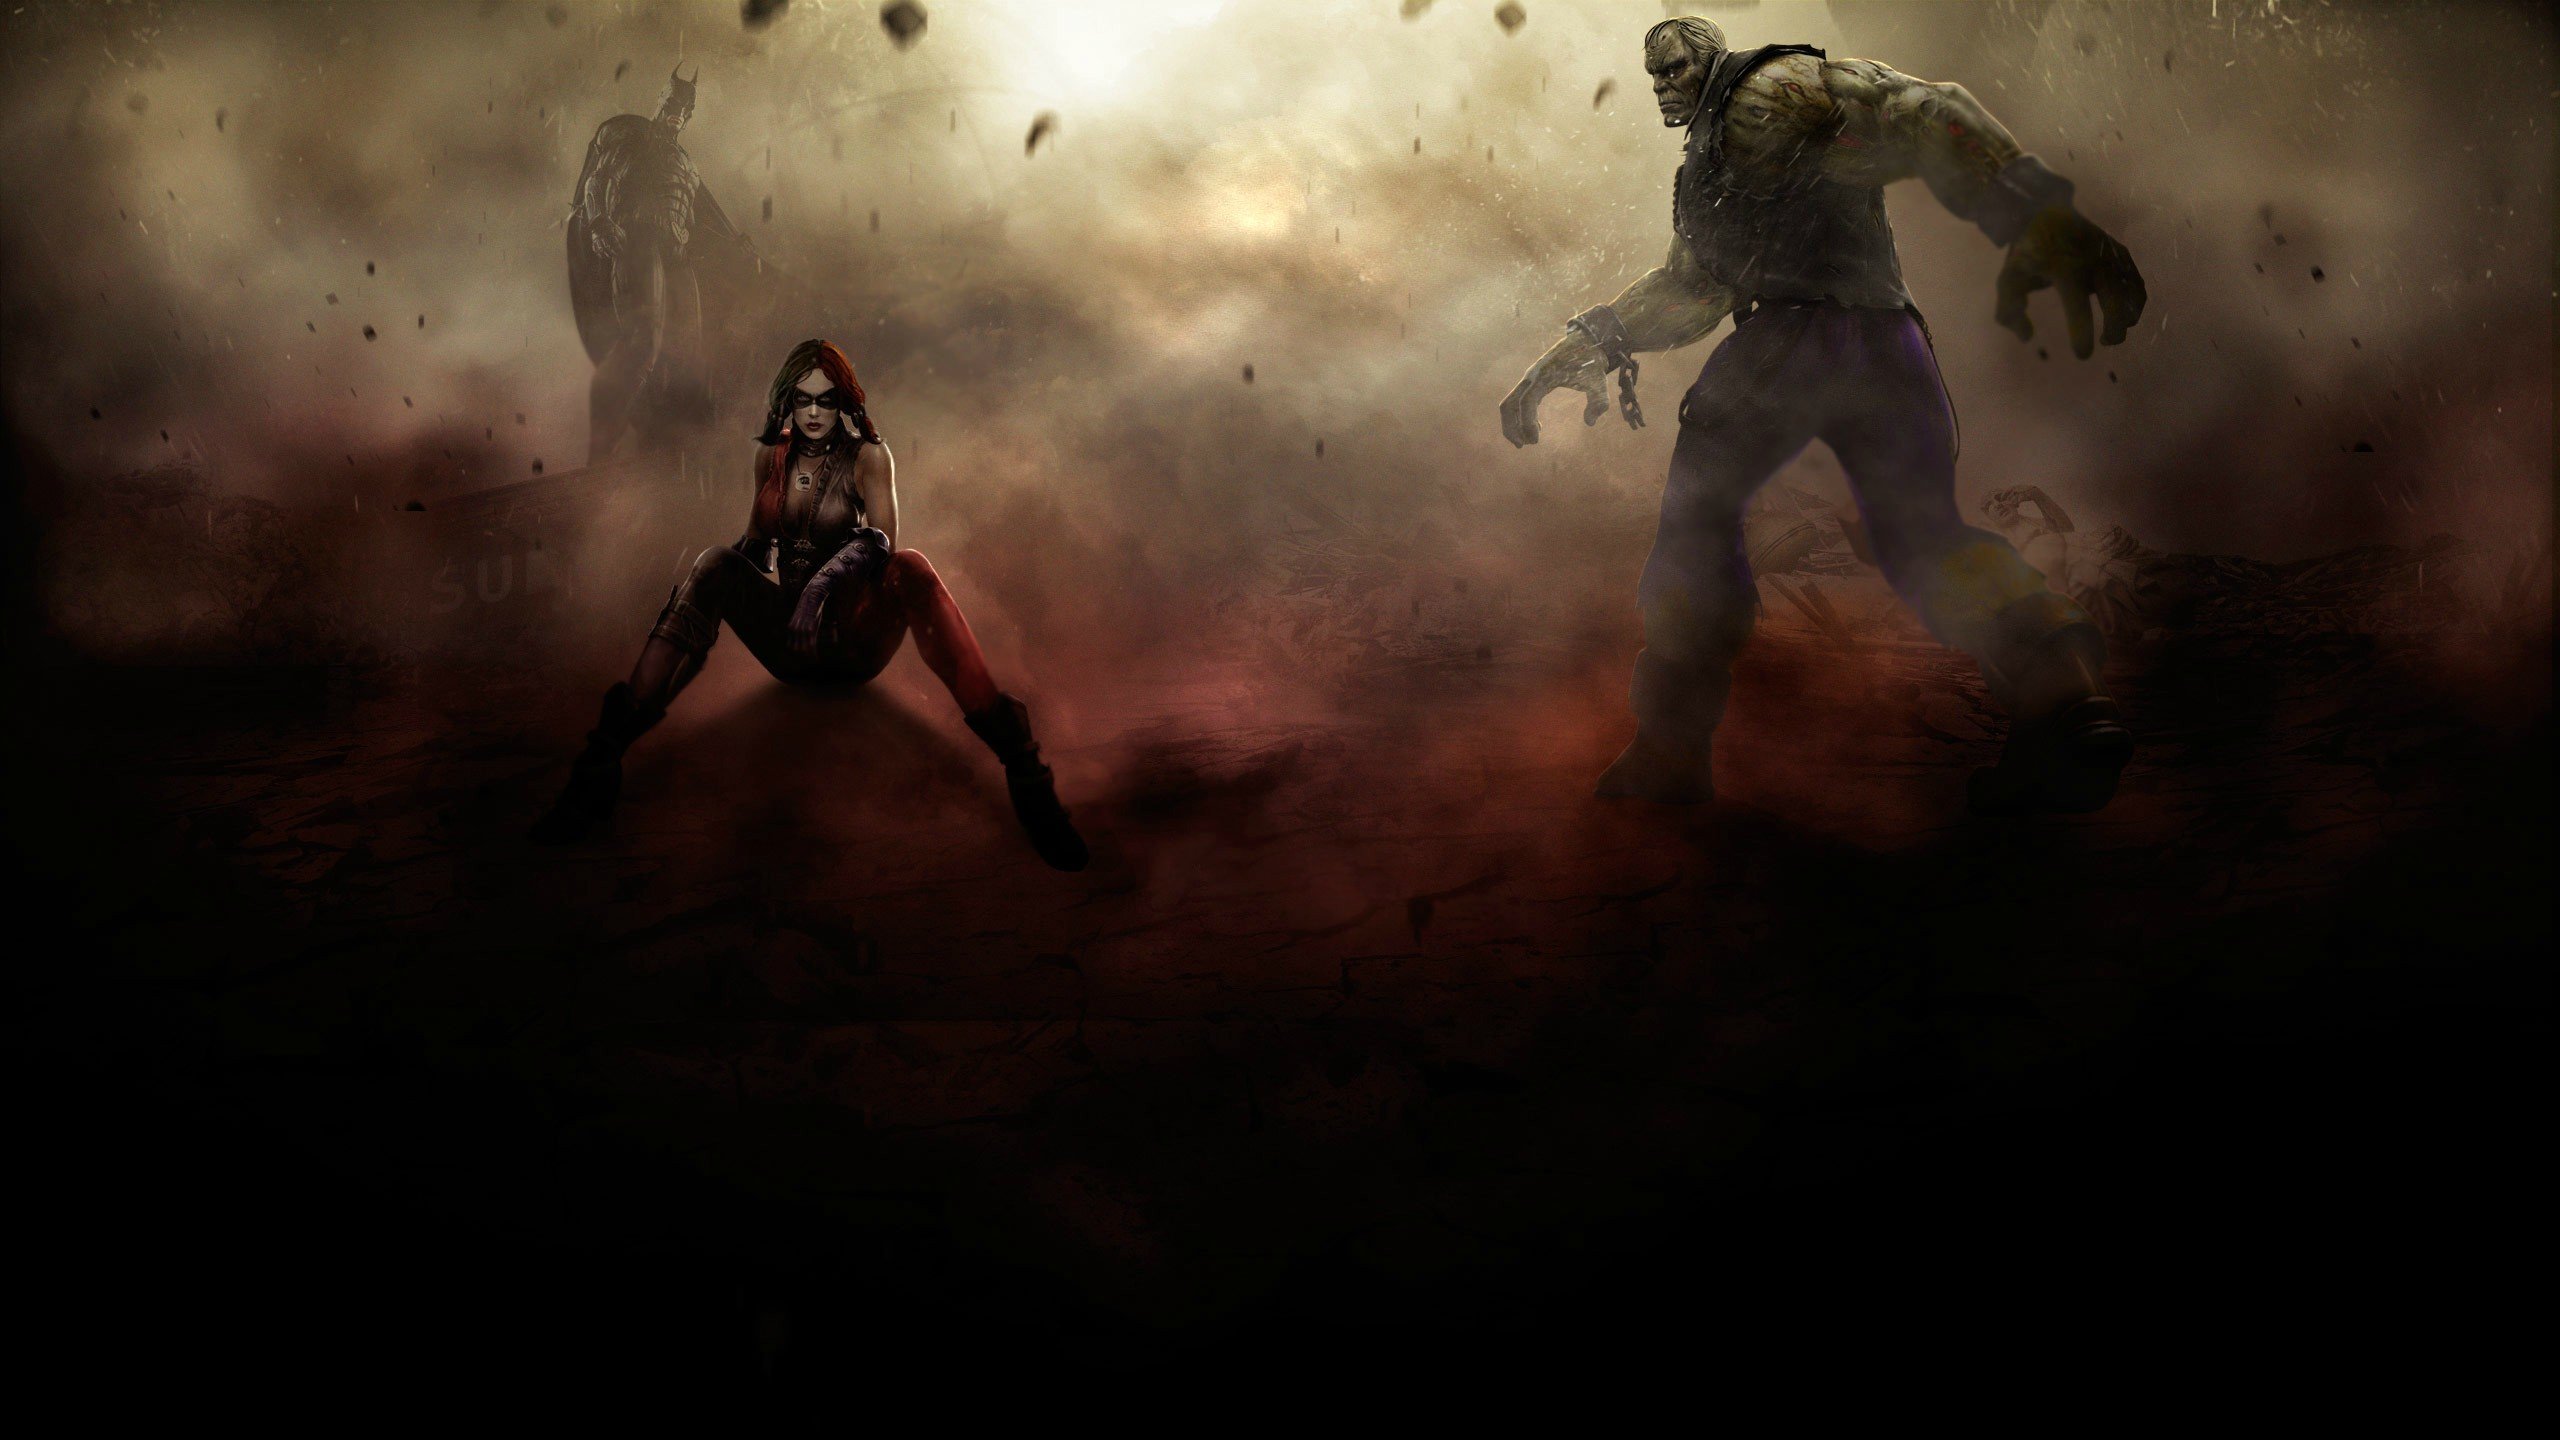 Best Injustice: Gods Among Us wallpaper ID:385169 for High Resolution hd 2560x1440 computer